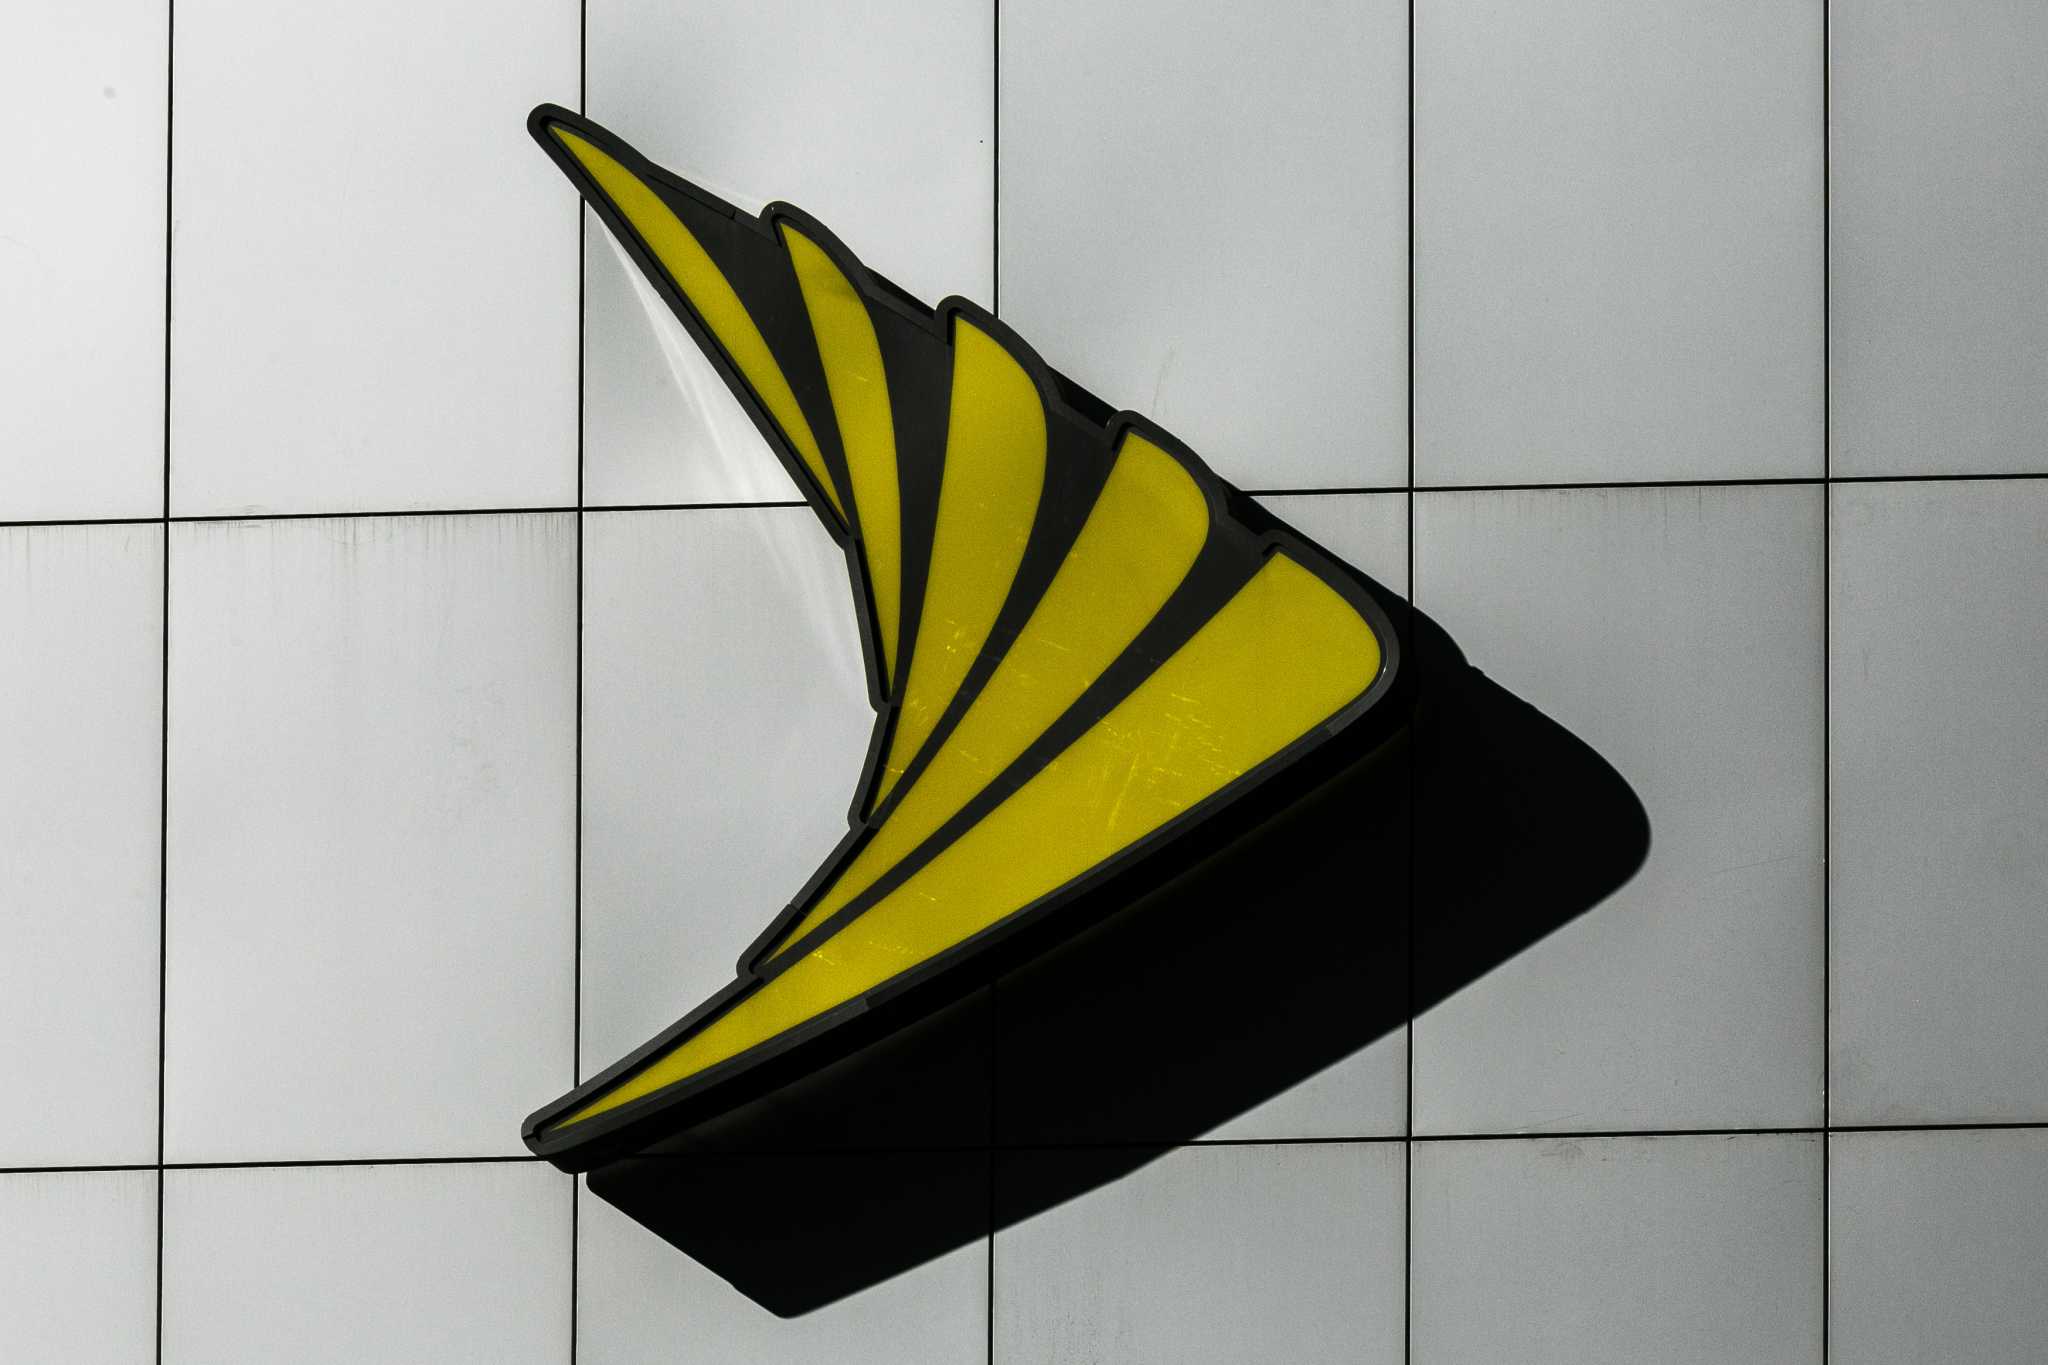 Sprint sets 5G launch in nine cities as competition heats up - San Antonio Express-News2048 x 1365